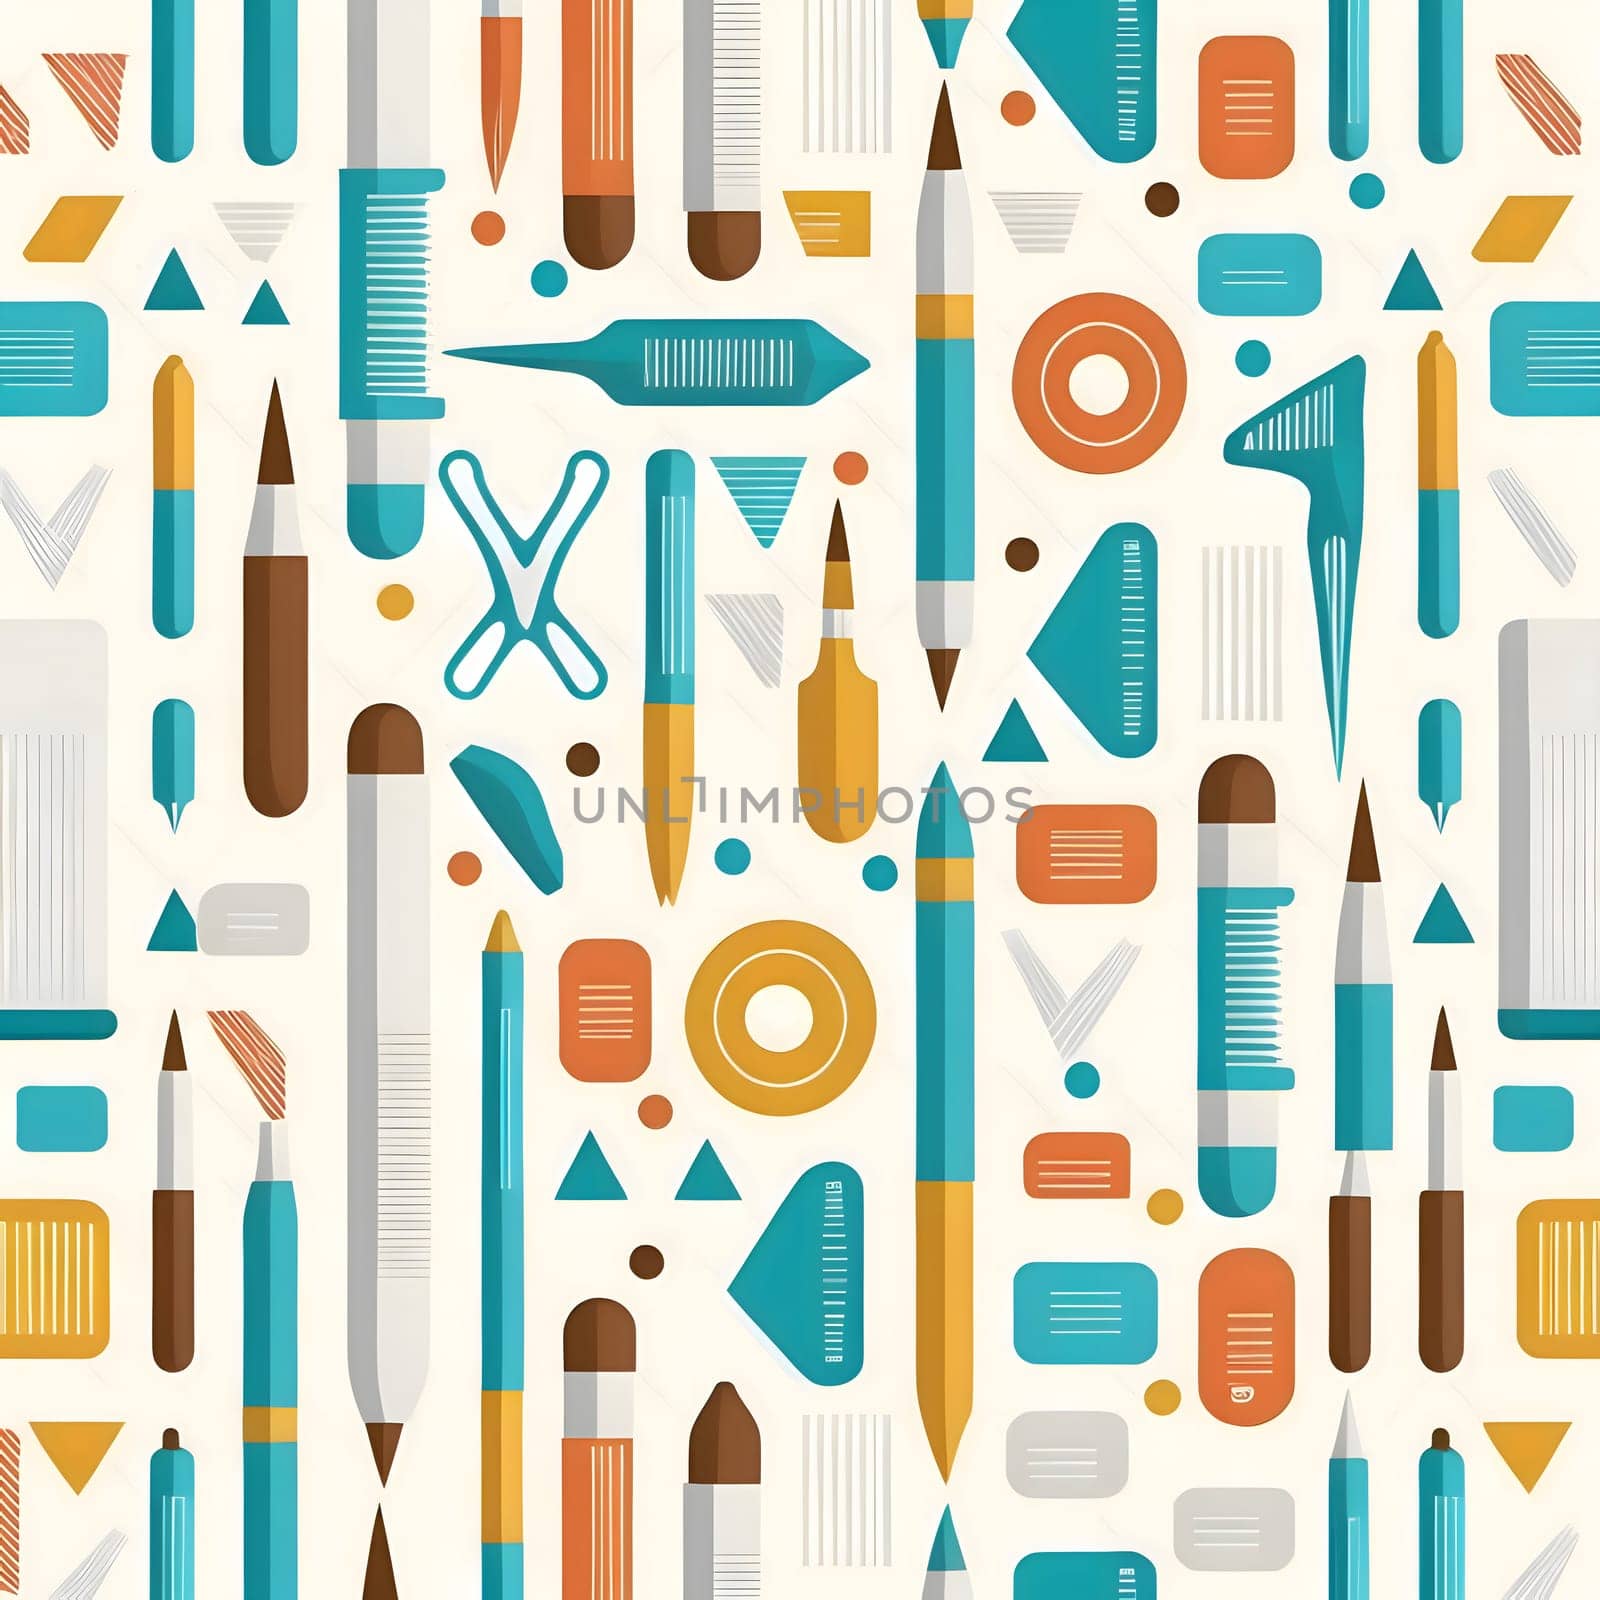 Patterns and banners backgrounds: Seamless pattern with stationery items. Vector illustration in flat style.